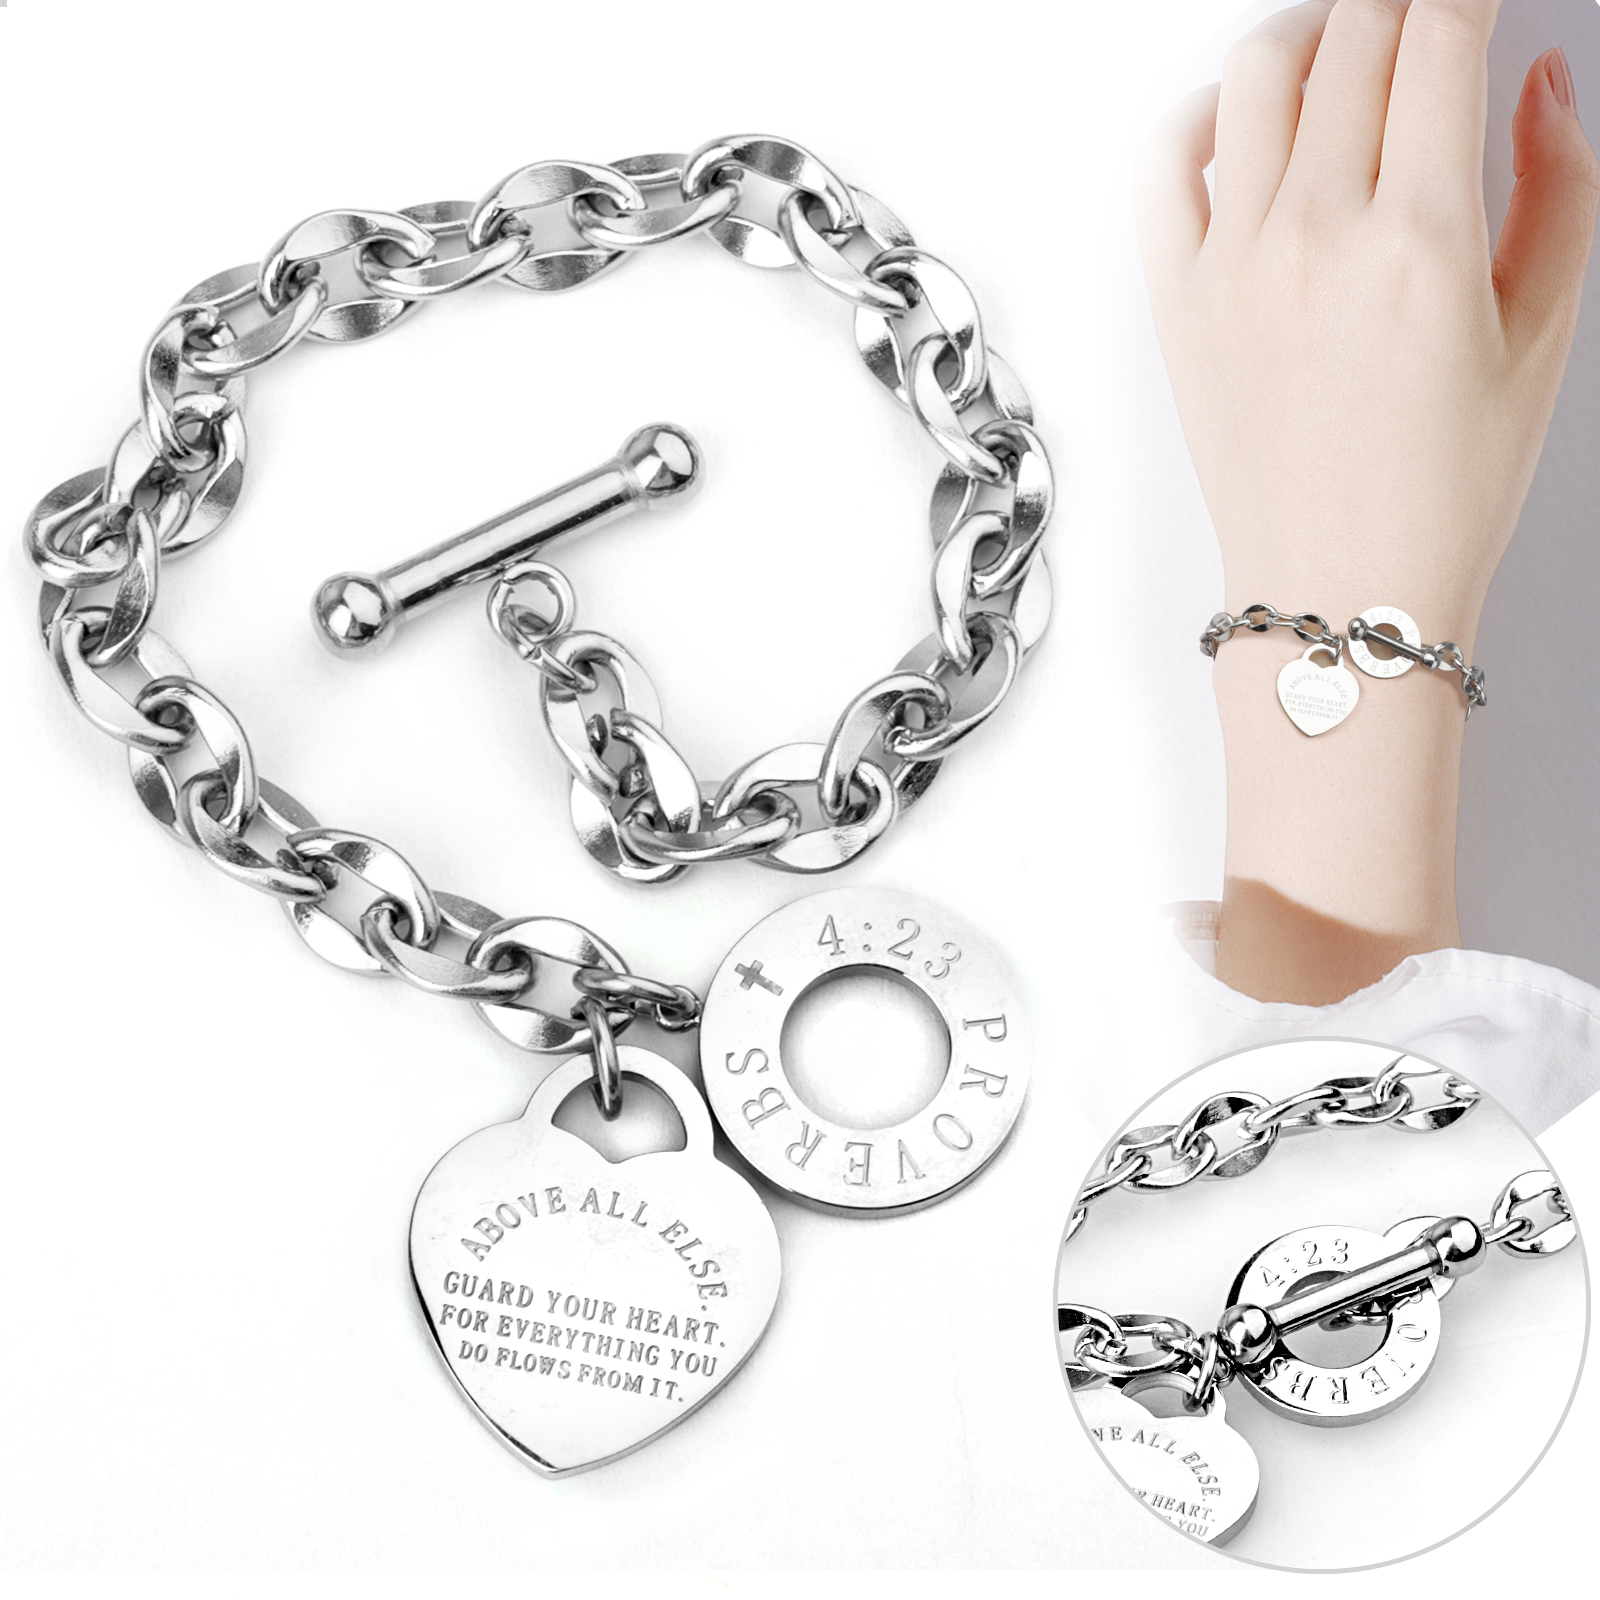 Stainless Steel Cable Wire Heart Shape Charm Acrylic Resin Beads Bangle Bracelet 